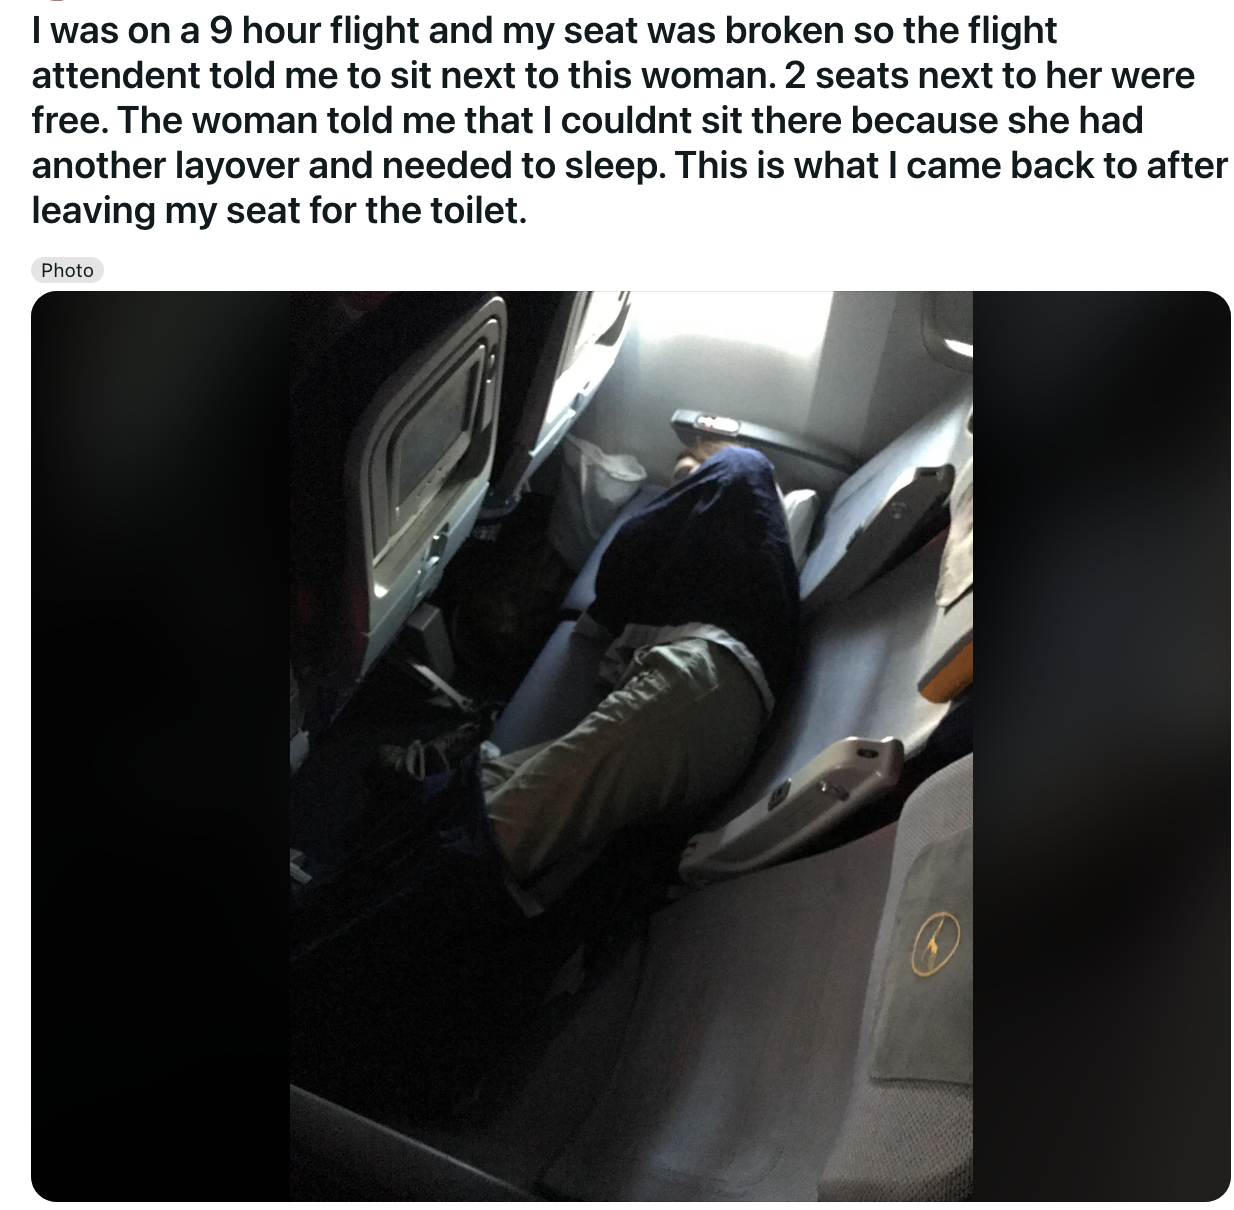 A person says they wanted to change seats because their seat broke; they found an empty seat, but the woman next to it claimed she needed it; they later found her sleeping across the two seats